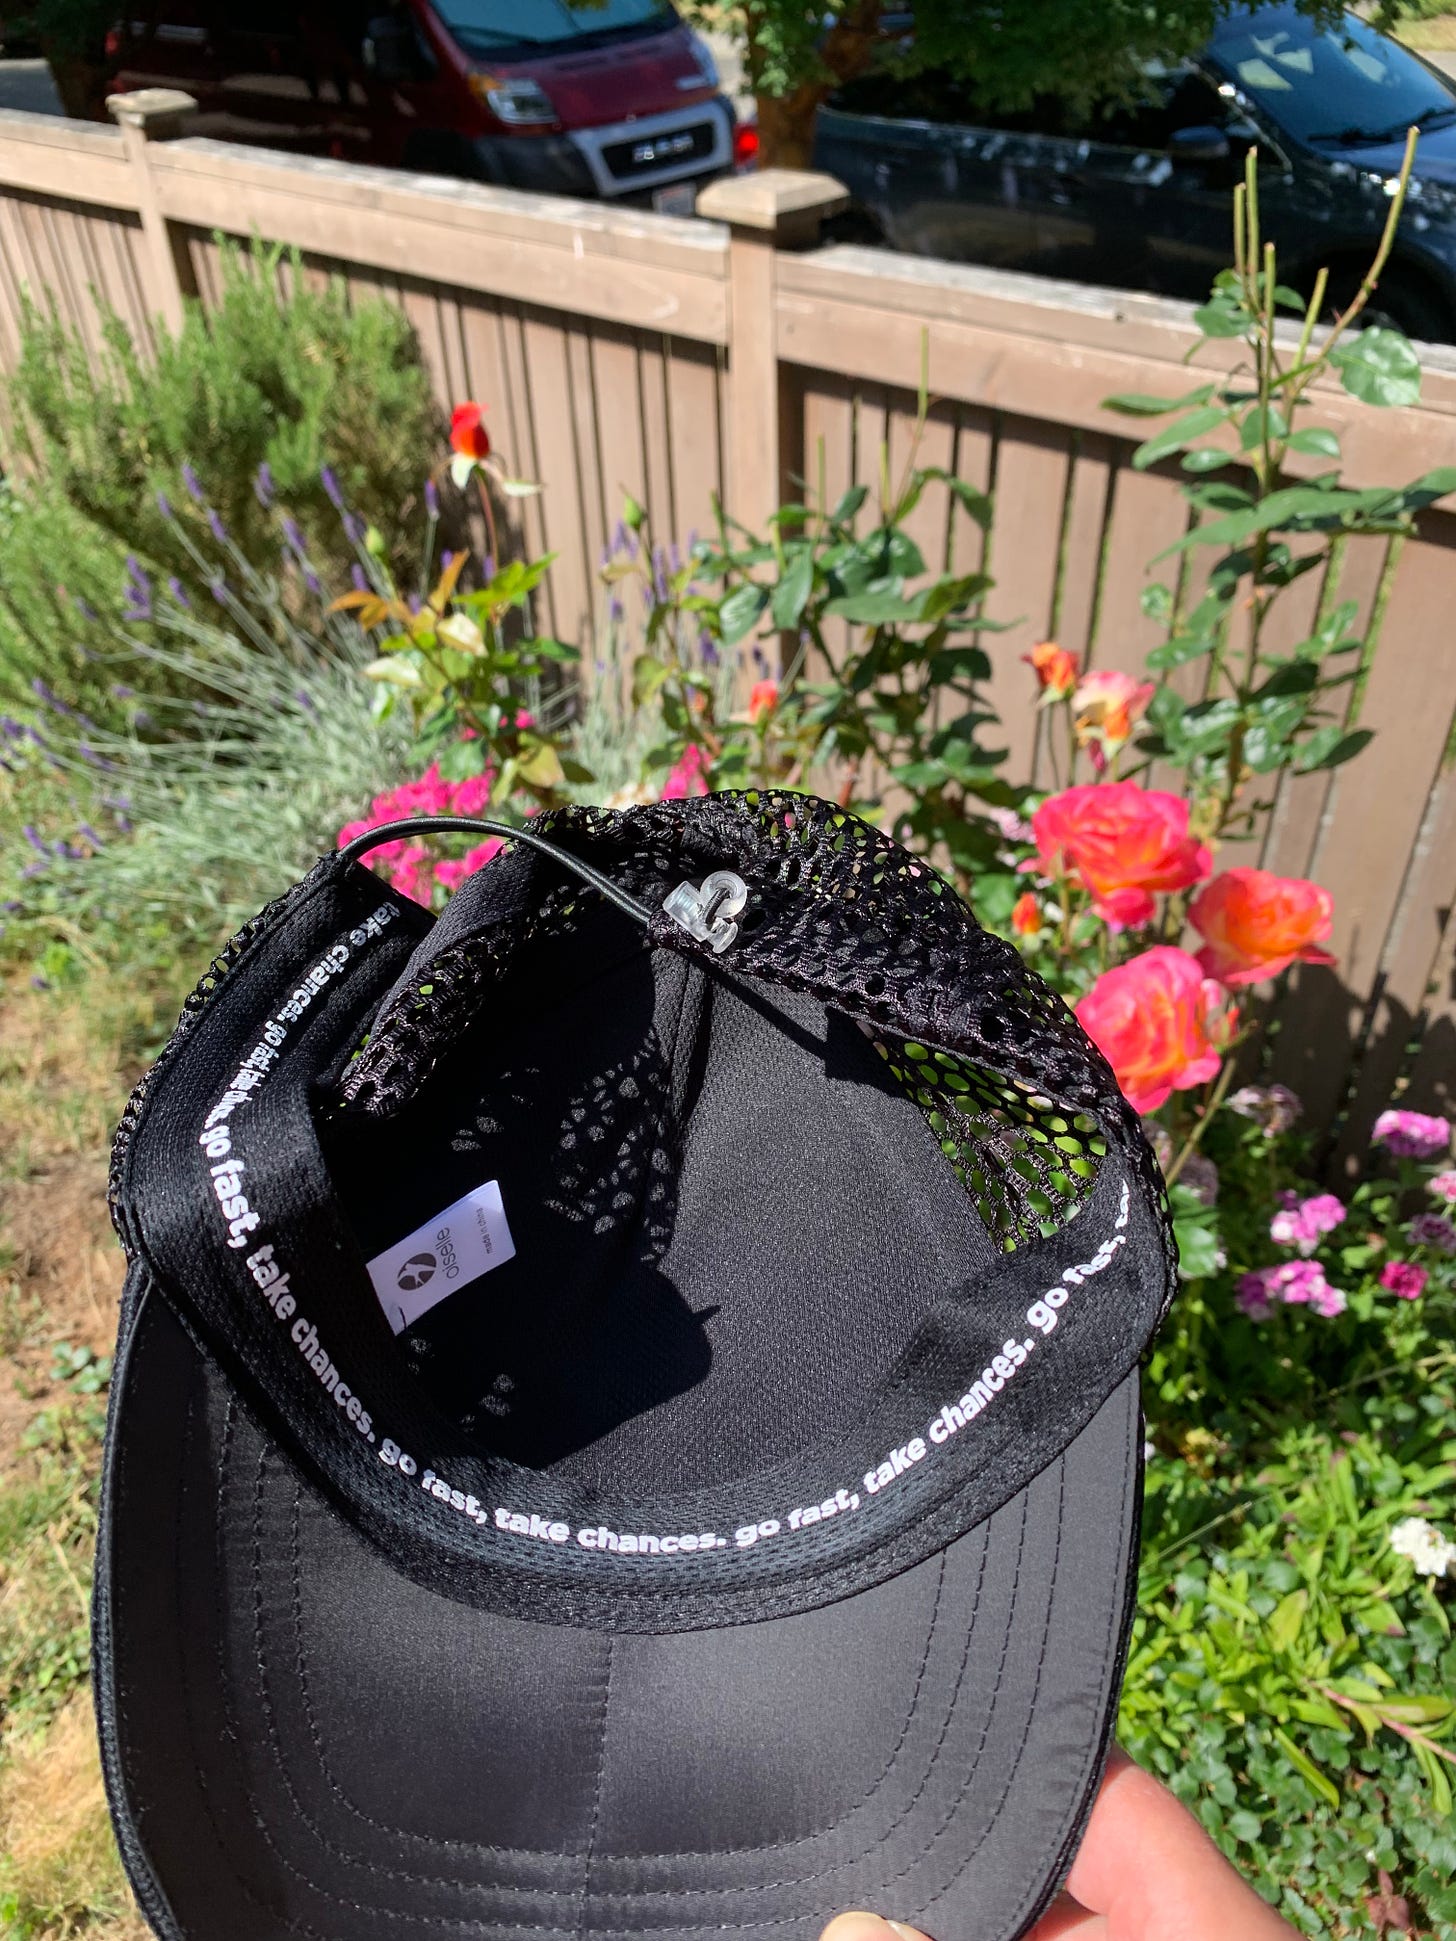 Photo shows the inside of Oiselle's Runner Trucker hat. The words "go fast, take chances." are repeated around the circumference of the sweatband. The pic also shows a blurry bit of my garden on a sunny day.